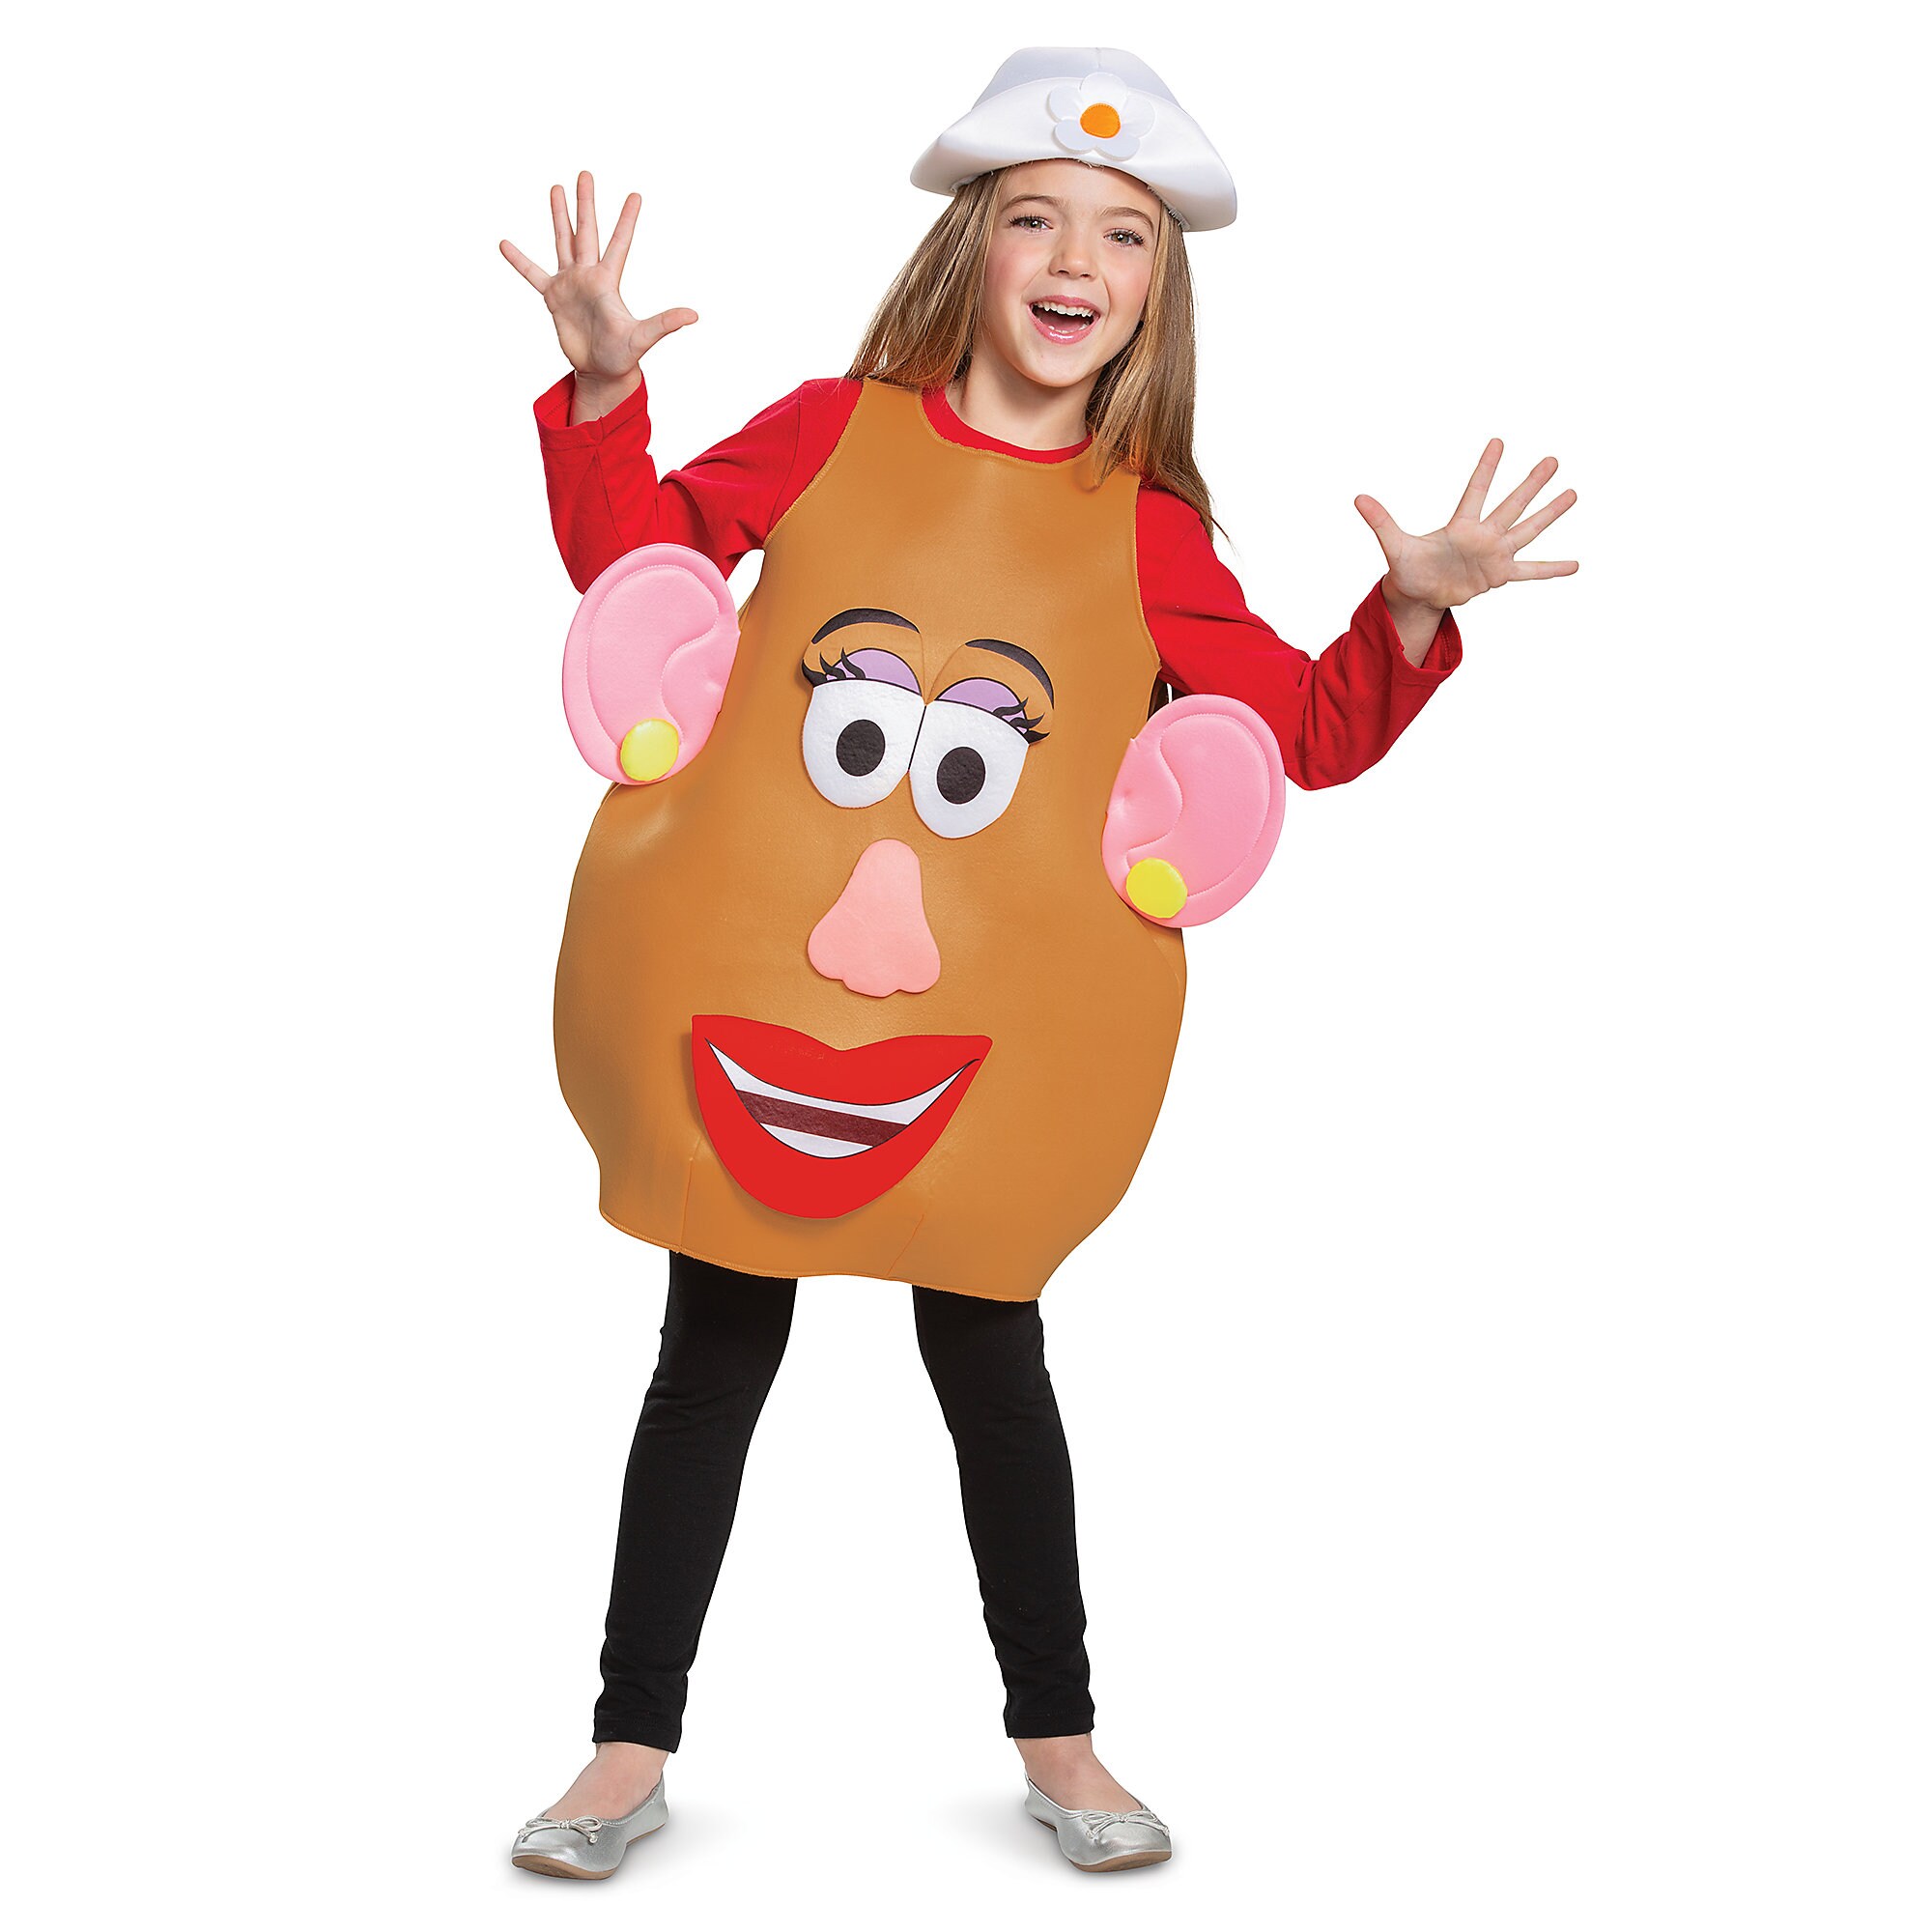 Mr. and Mrs. Potato Head Deluxe Costume for Kids - Toy Story